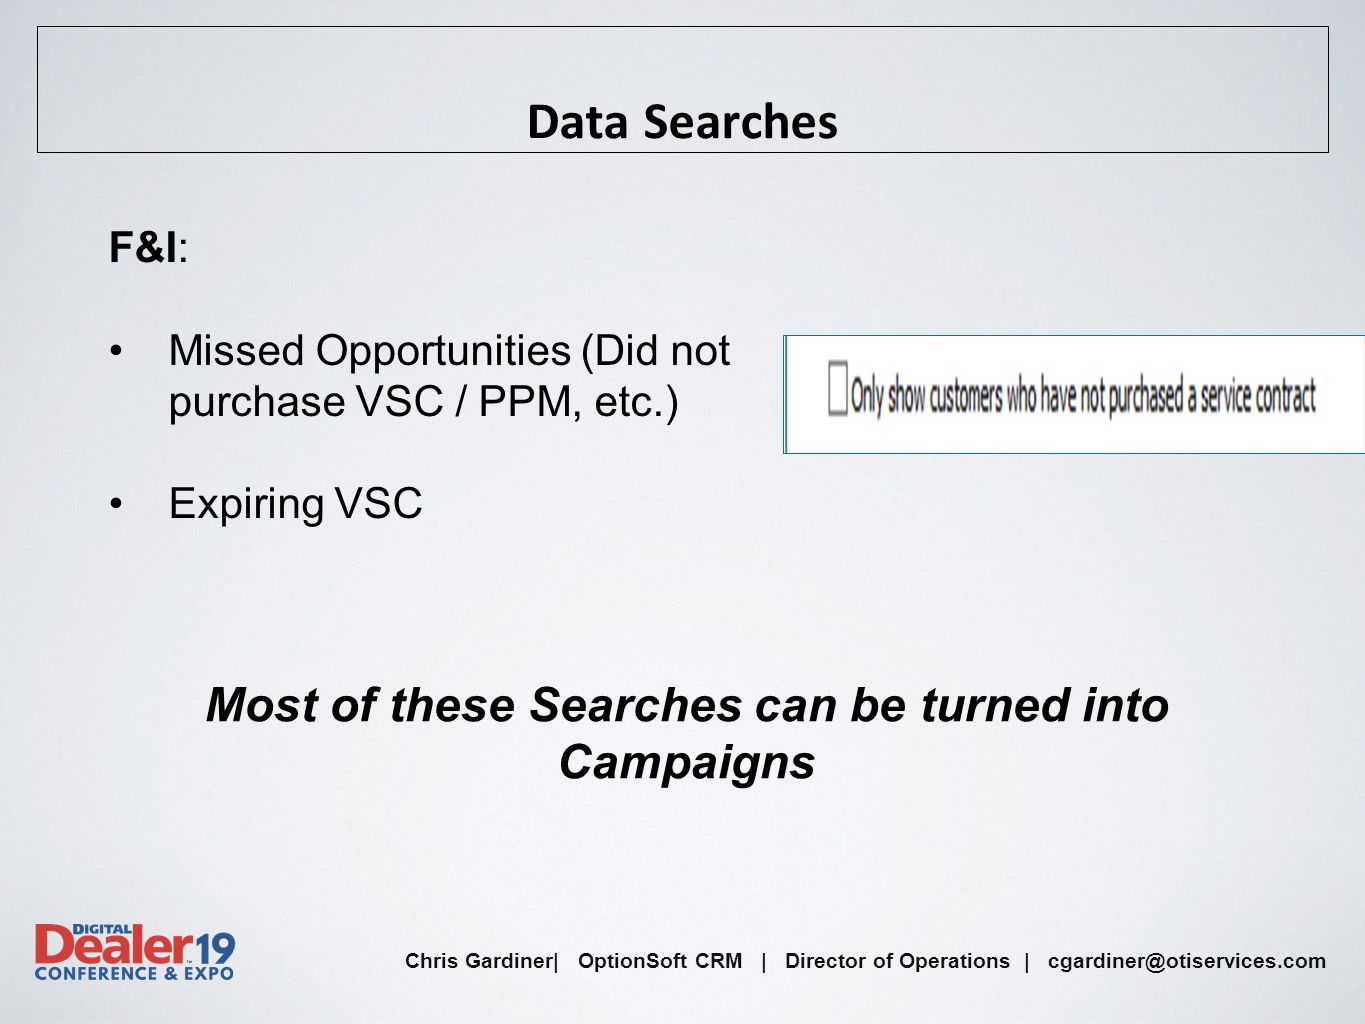 Chris Gardiner| OptionSoft CRM | Director of Operations | Data Searches F&I: Missed Opportunities (Did not purchase VSC / PPM, etc.) Expiring VSC Most of these Searches can be turned into Campaigns